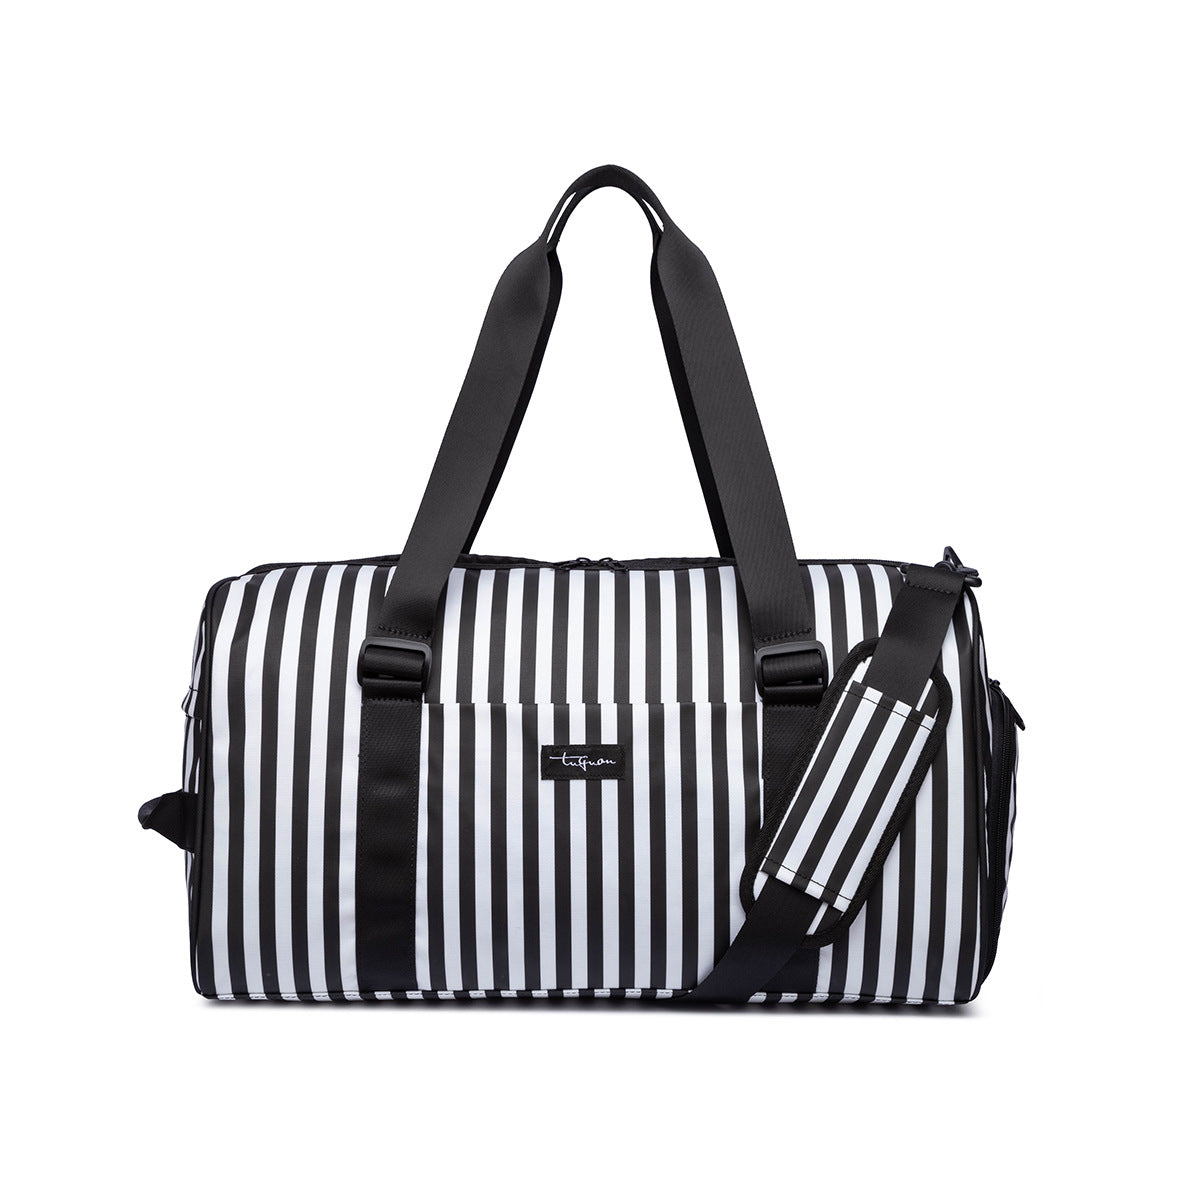 Women's Dry and Wet Separation Gym Bag Designed for Style